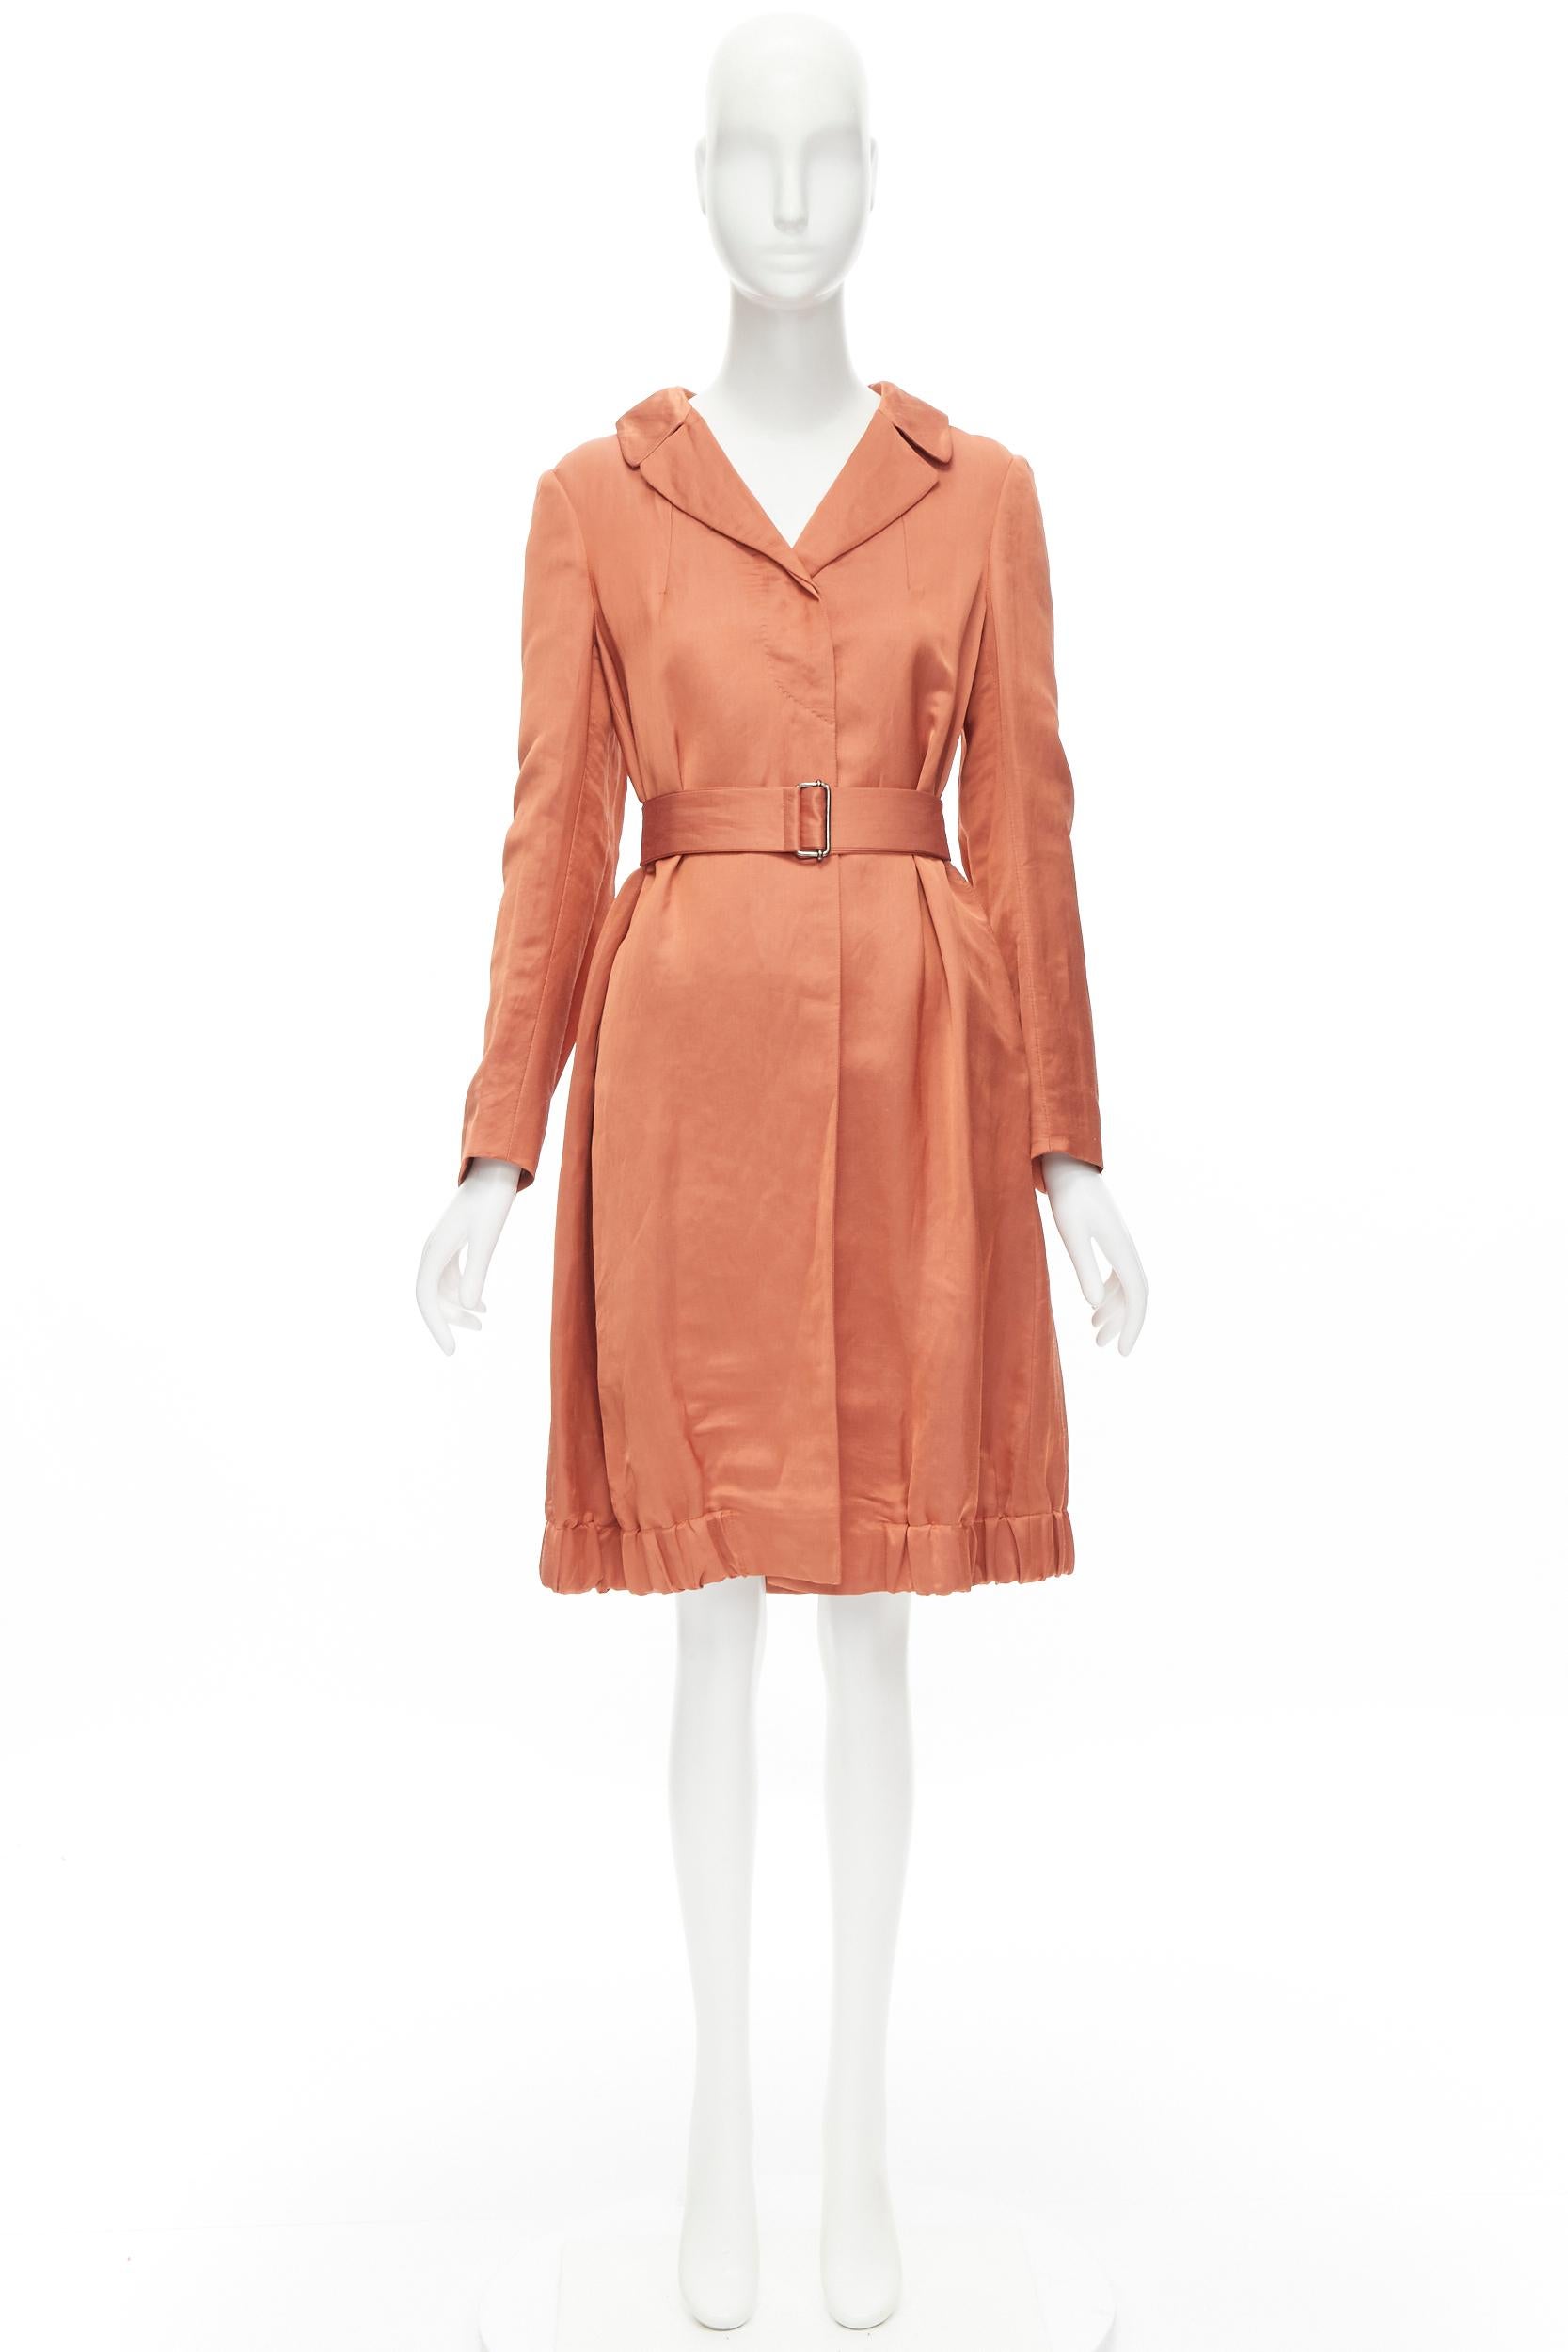 DRIES VAN NOTEN orange ramie rayon elasticated ruched hem belted trench coat S For Sale 4